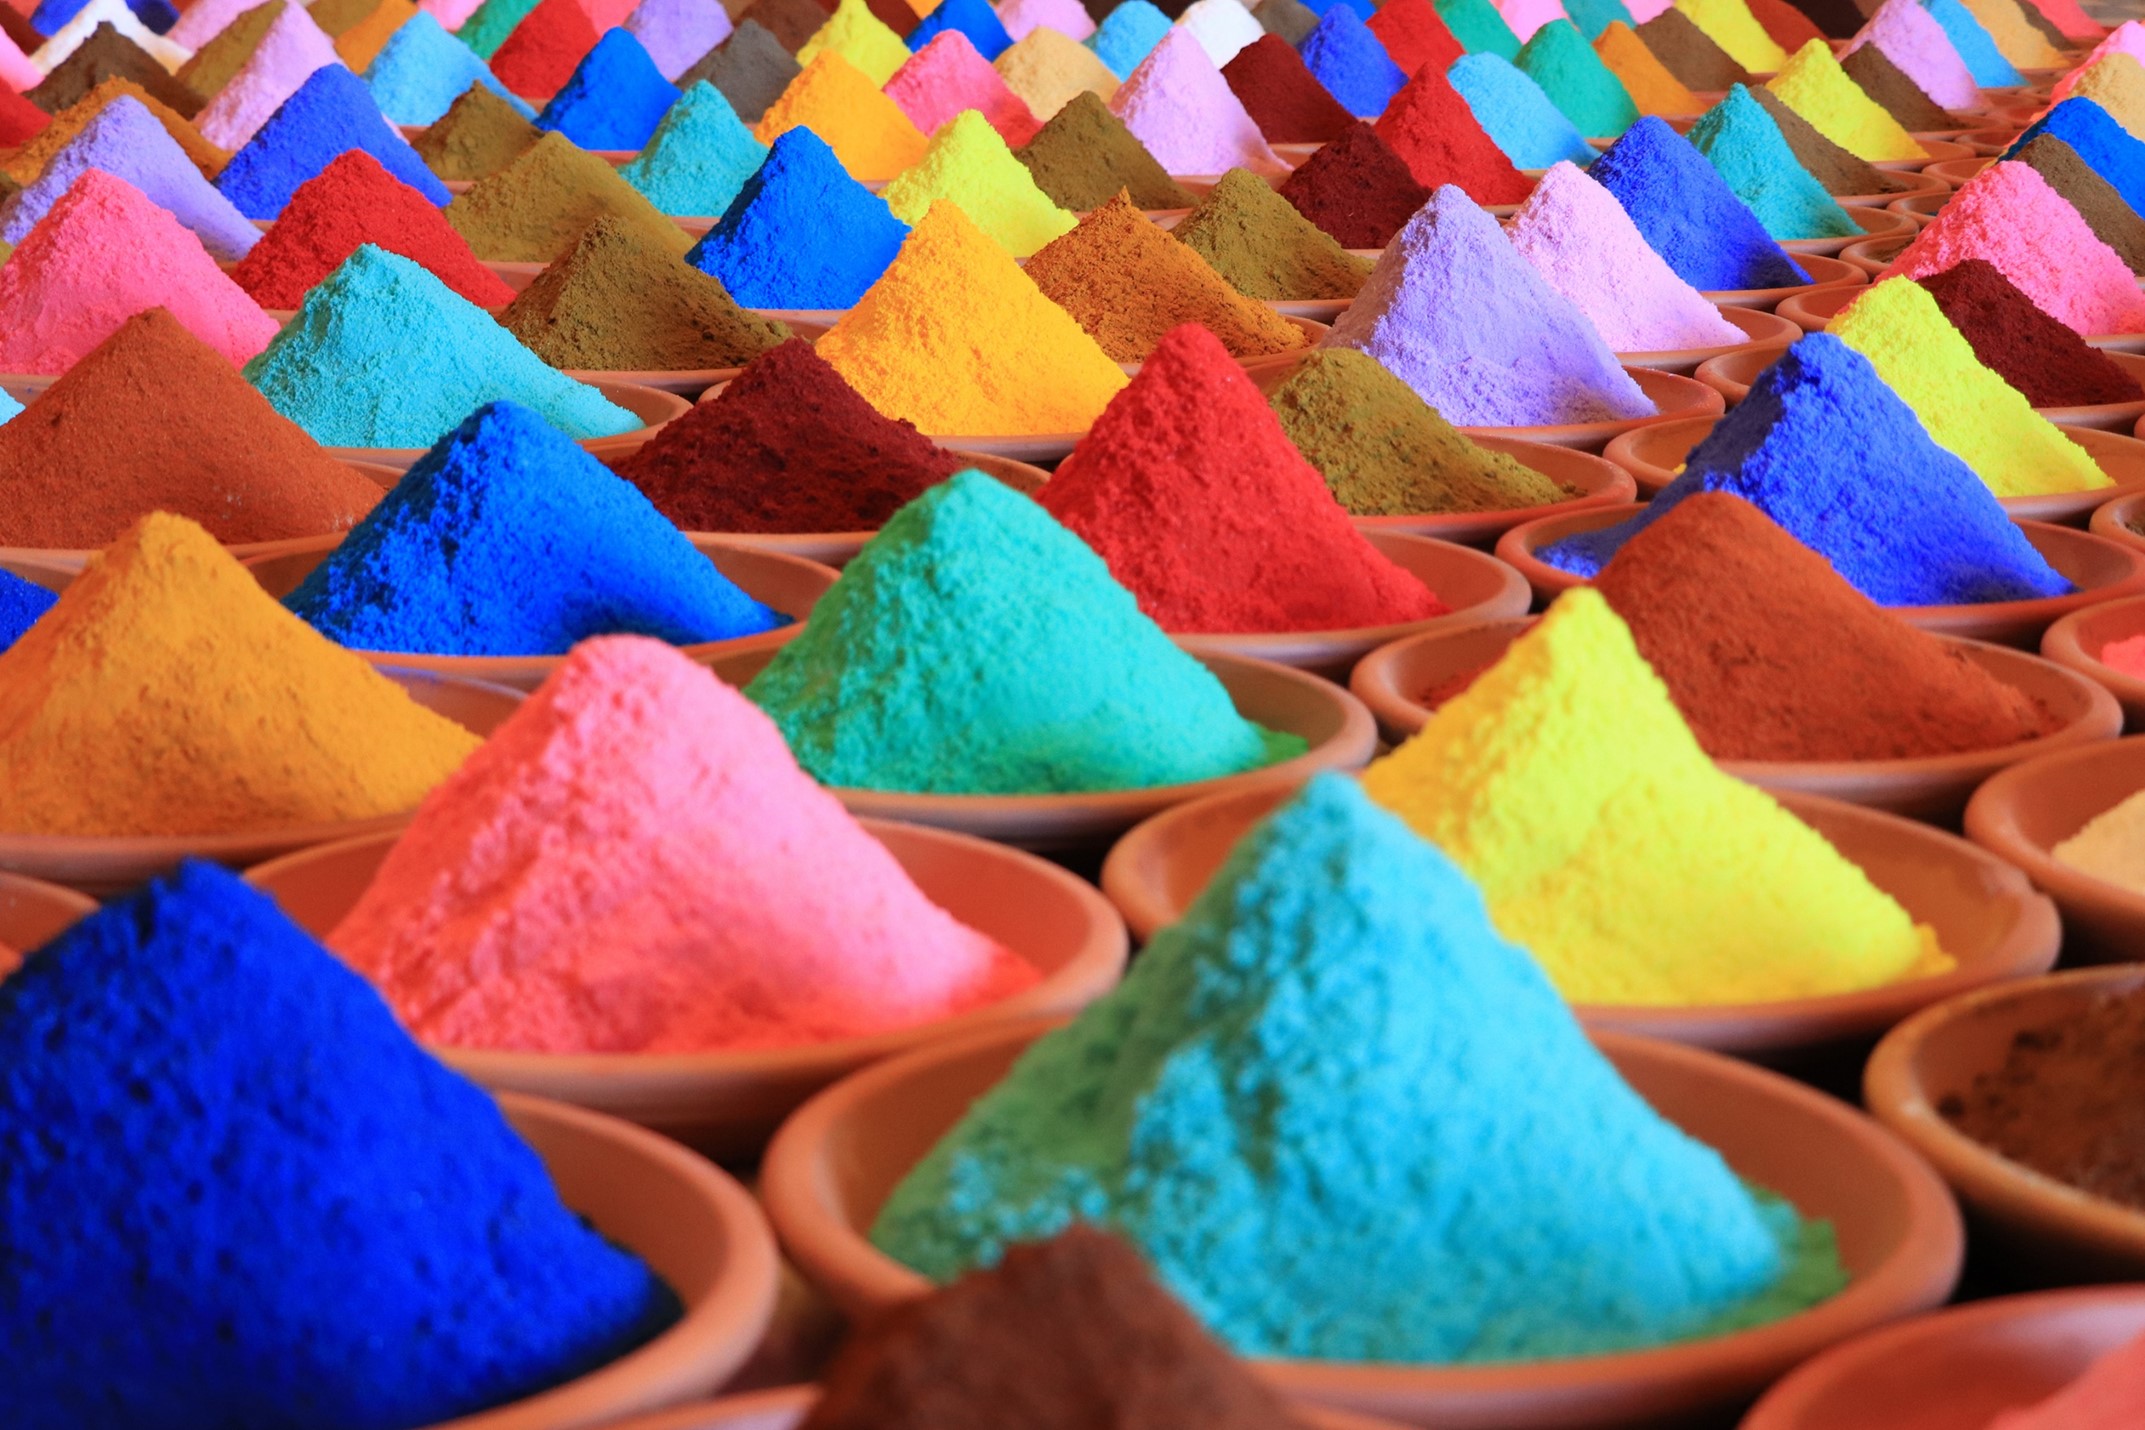 Ceramic pots filled with colored sand